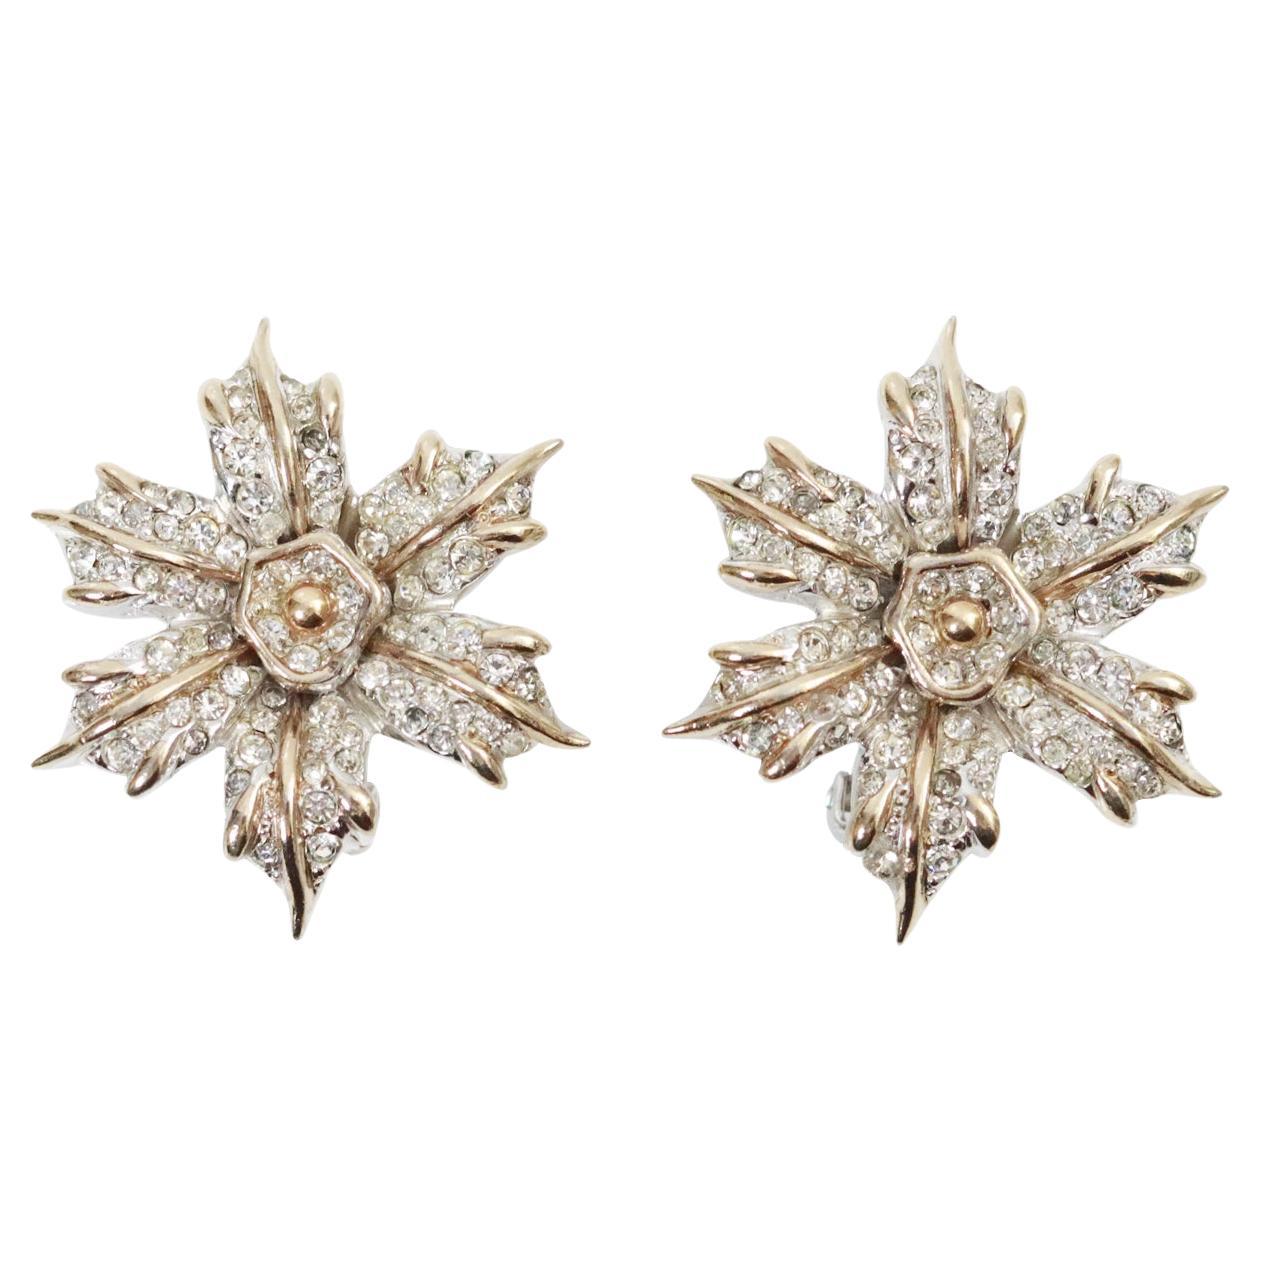 Vintage Halbe Silver and Gold Tone Diamante Flower Earrings, Circa 1960's